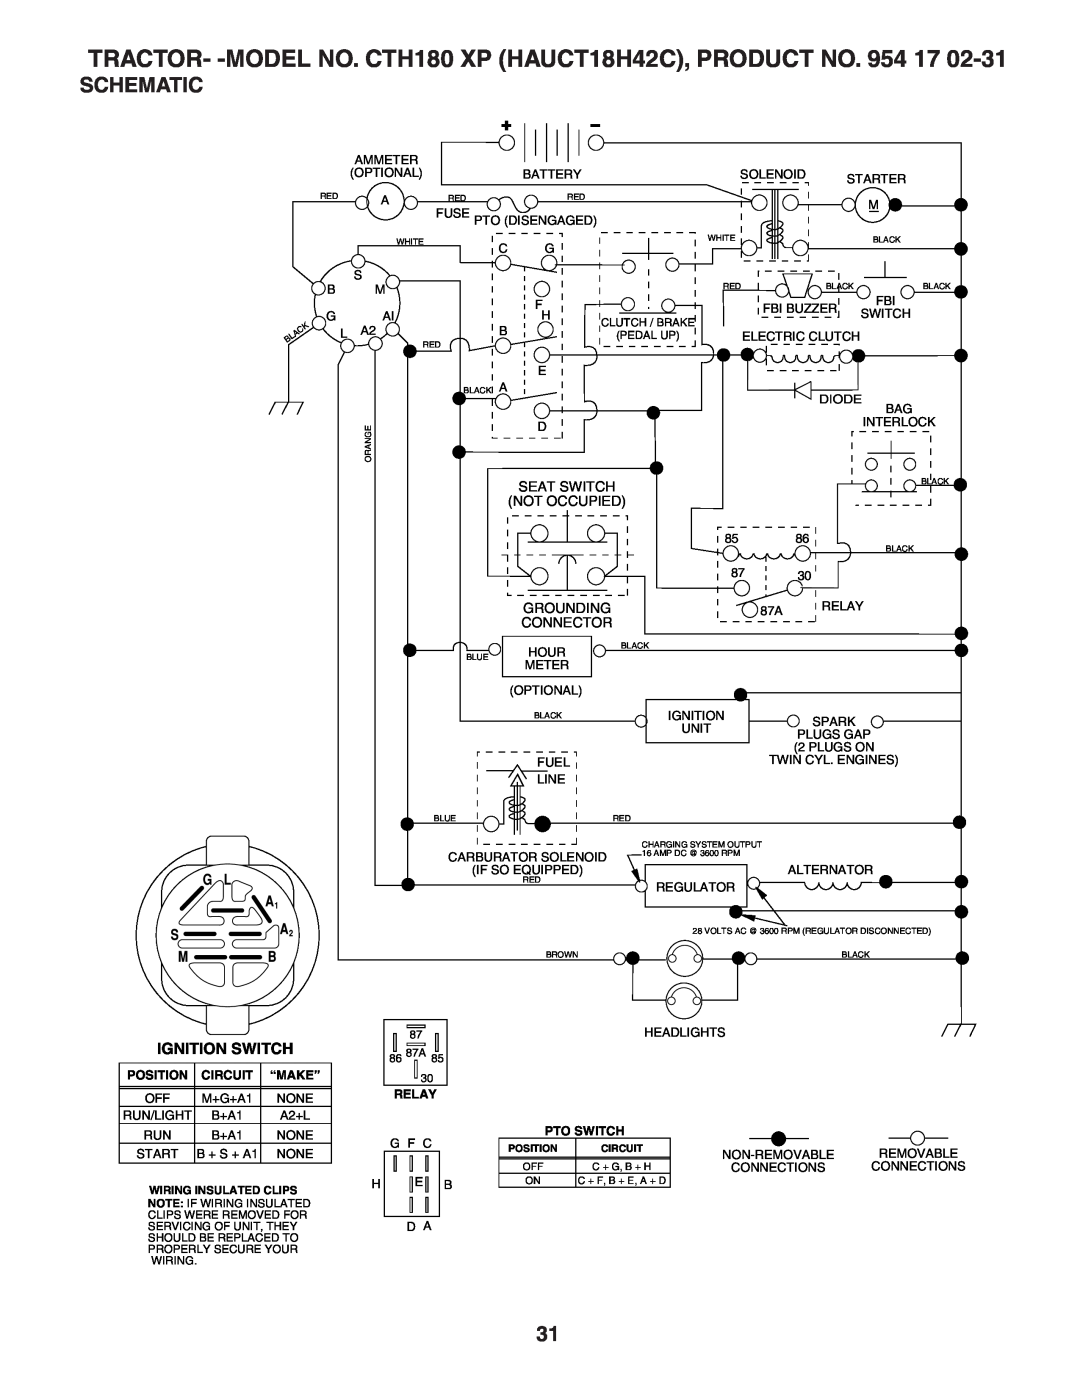 Husqvarna CTH180 XP owner manual Schematic, Ignition Switch, Position, Circuit, “Make”, Pto Switch 